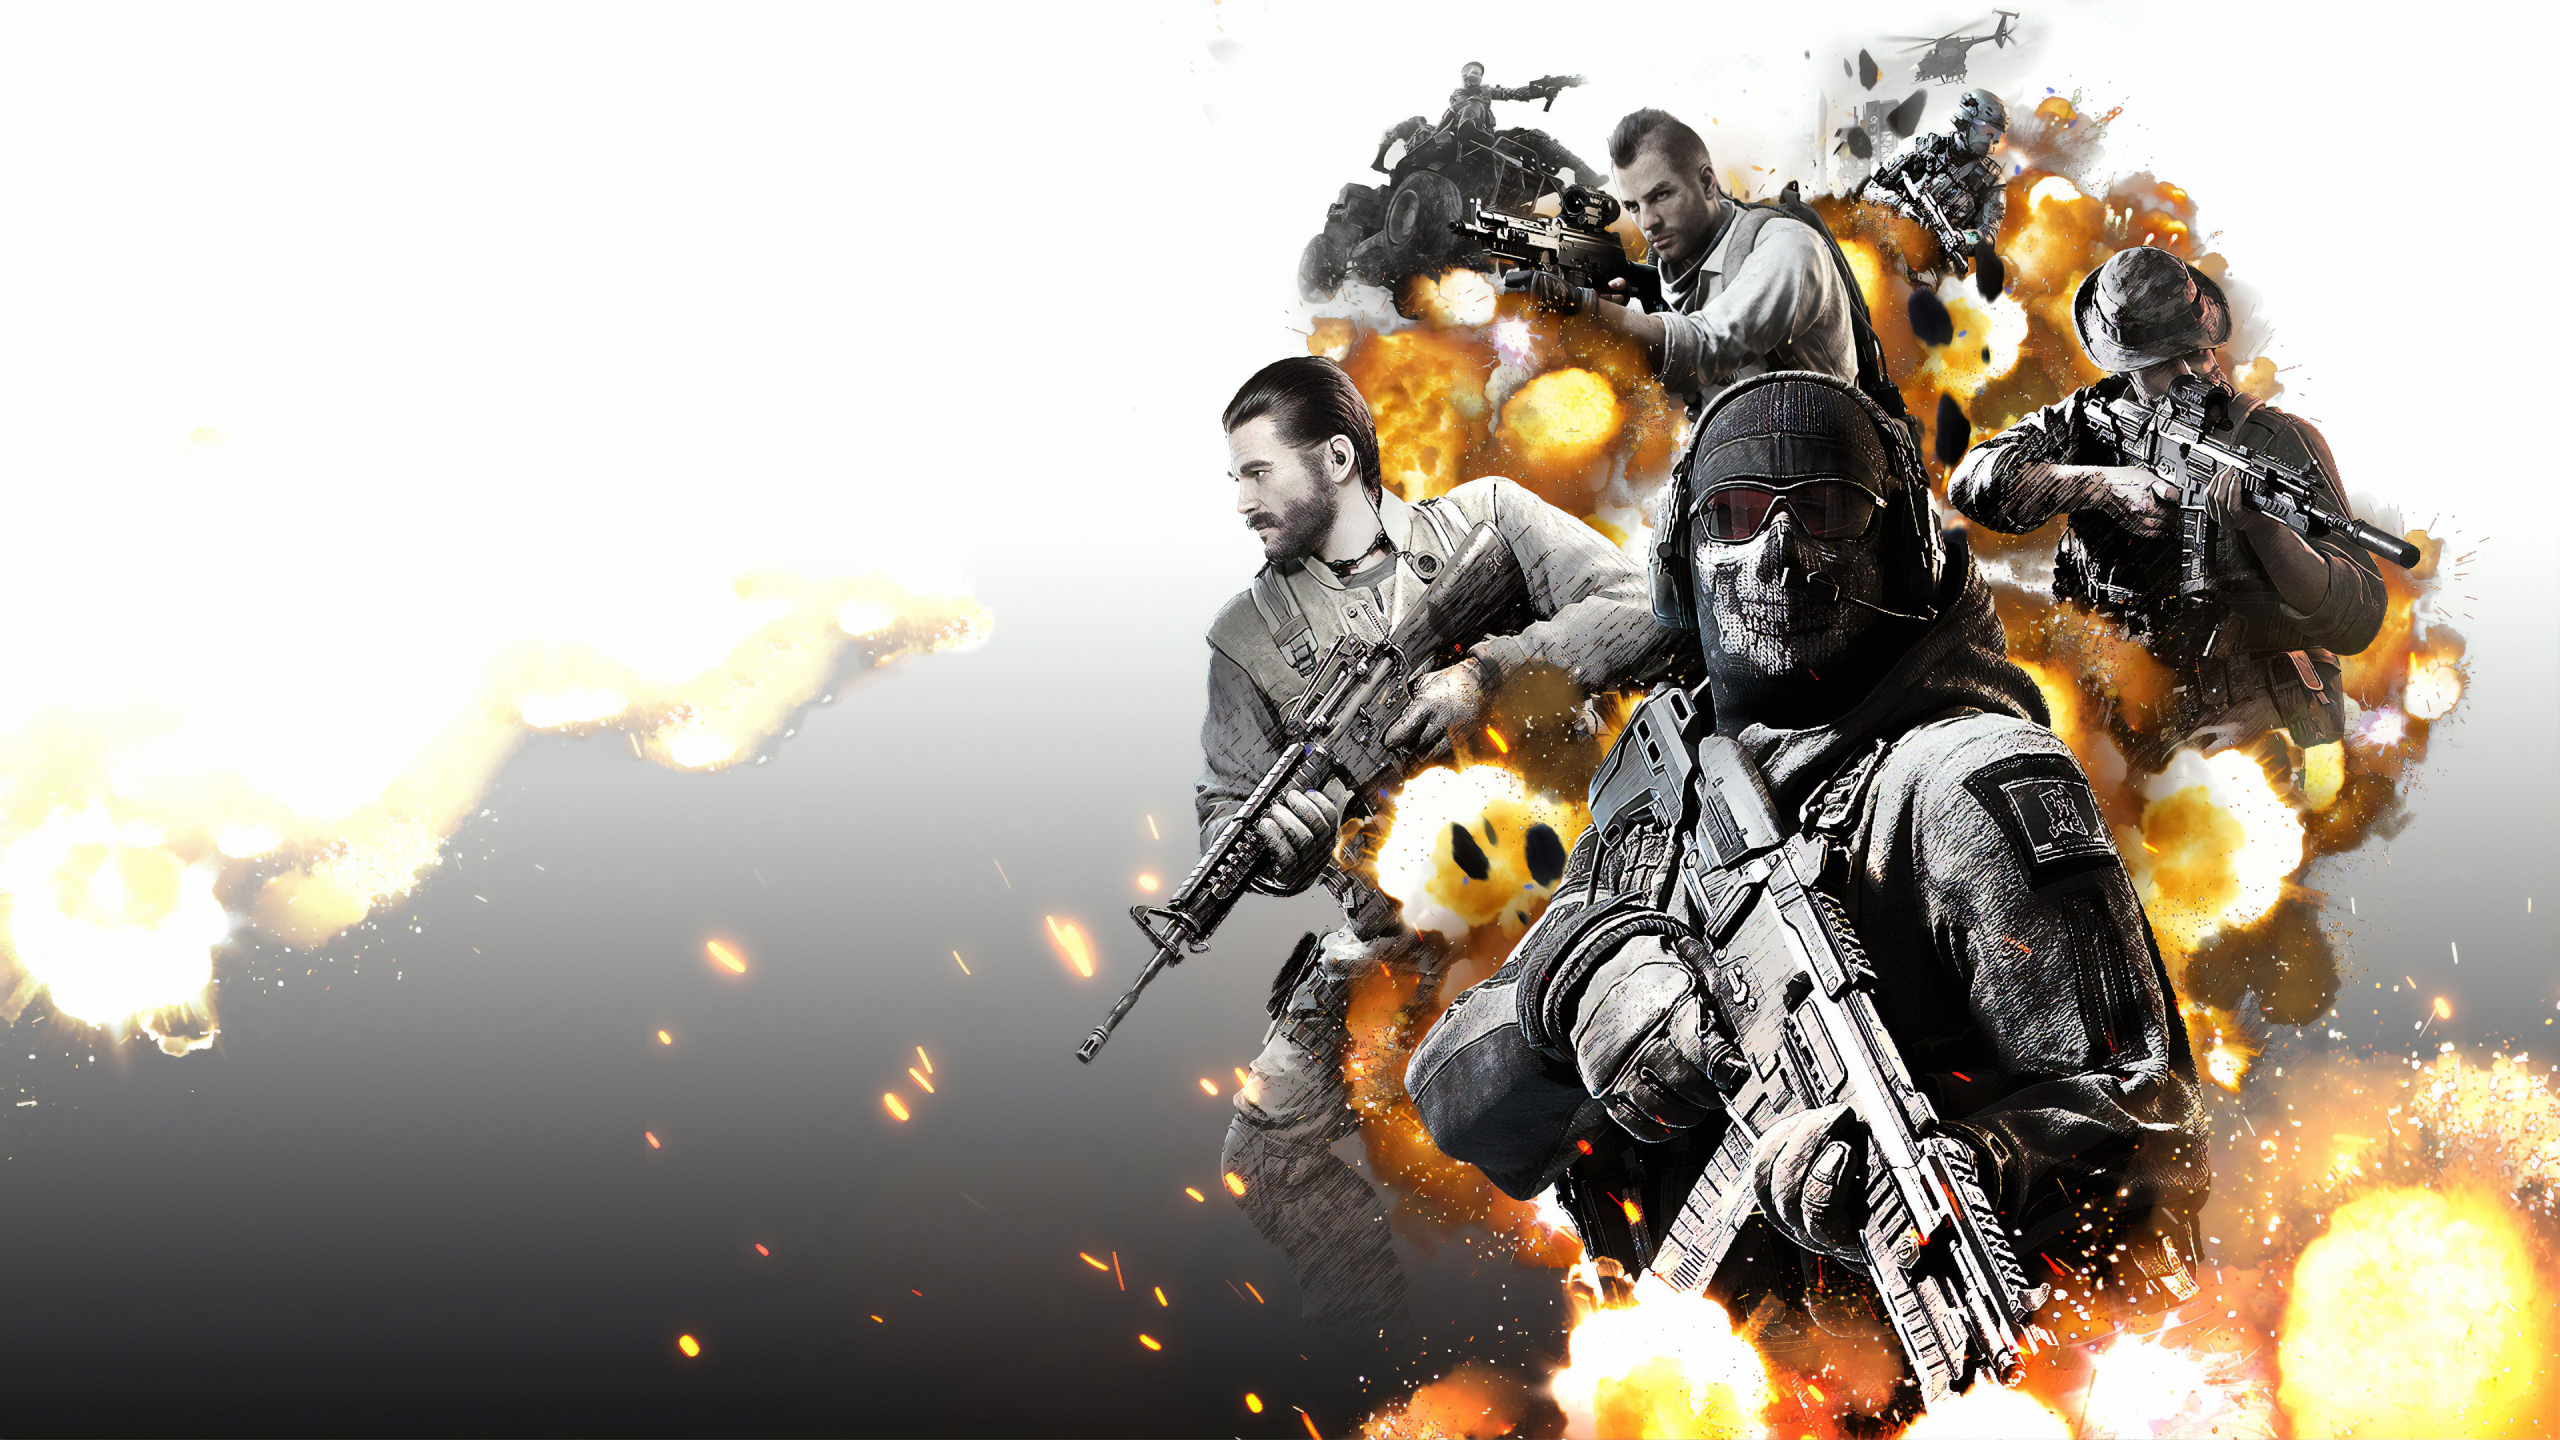 2560x1440 wallpaper call of duty ghosts